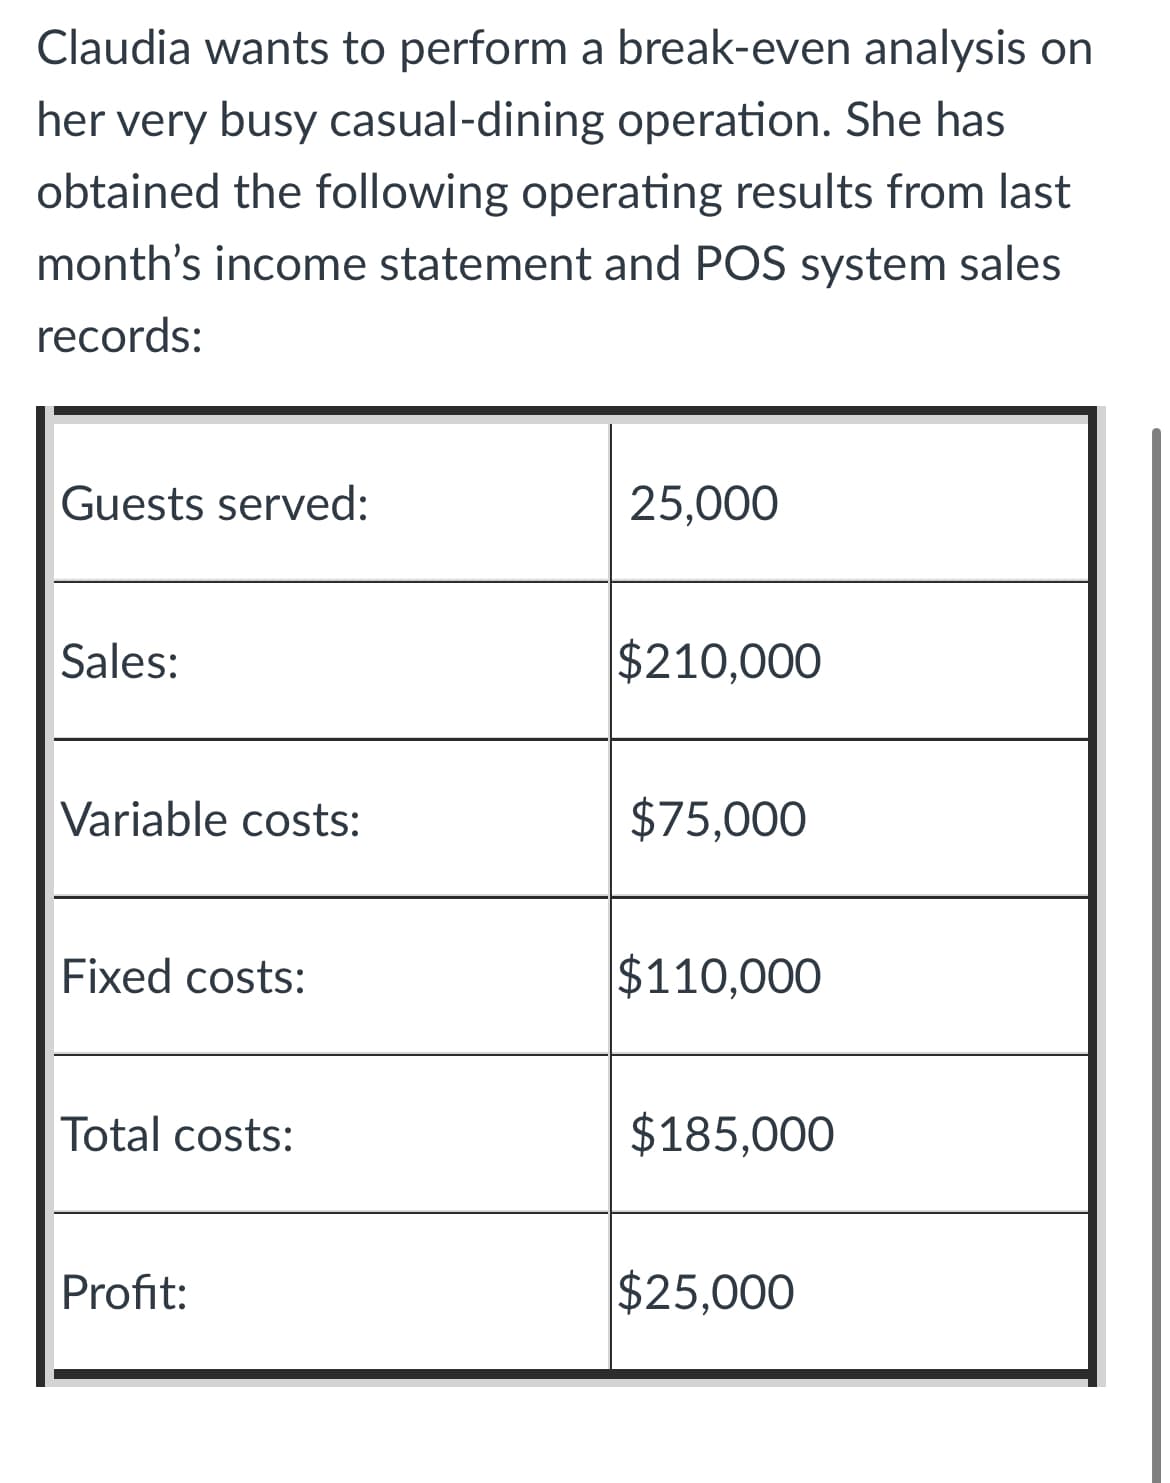 Claudia wants to perform a break-even analysis on
her very busy casual-dining operation. She has
obtained the following operating results from last
month's income statement and POS system sales
records:
Guests served:
Sales:
Variable costs:
Fixed costs:
Total costs:
Profit:
25,000
$210,000
$75,000
$110,000
$185,000
$25,000